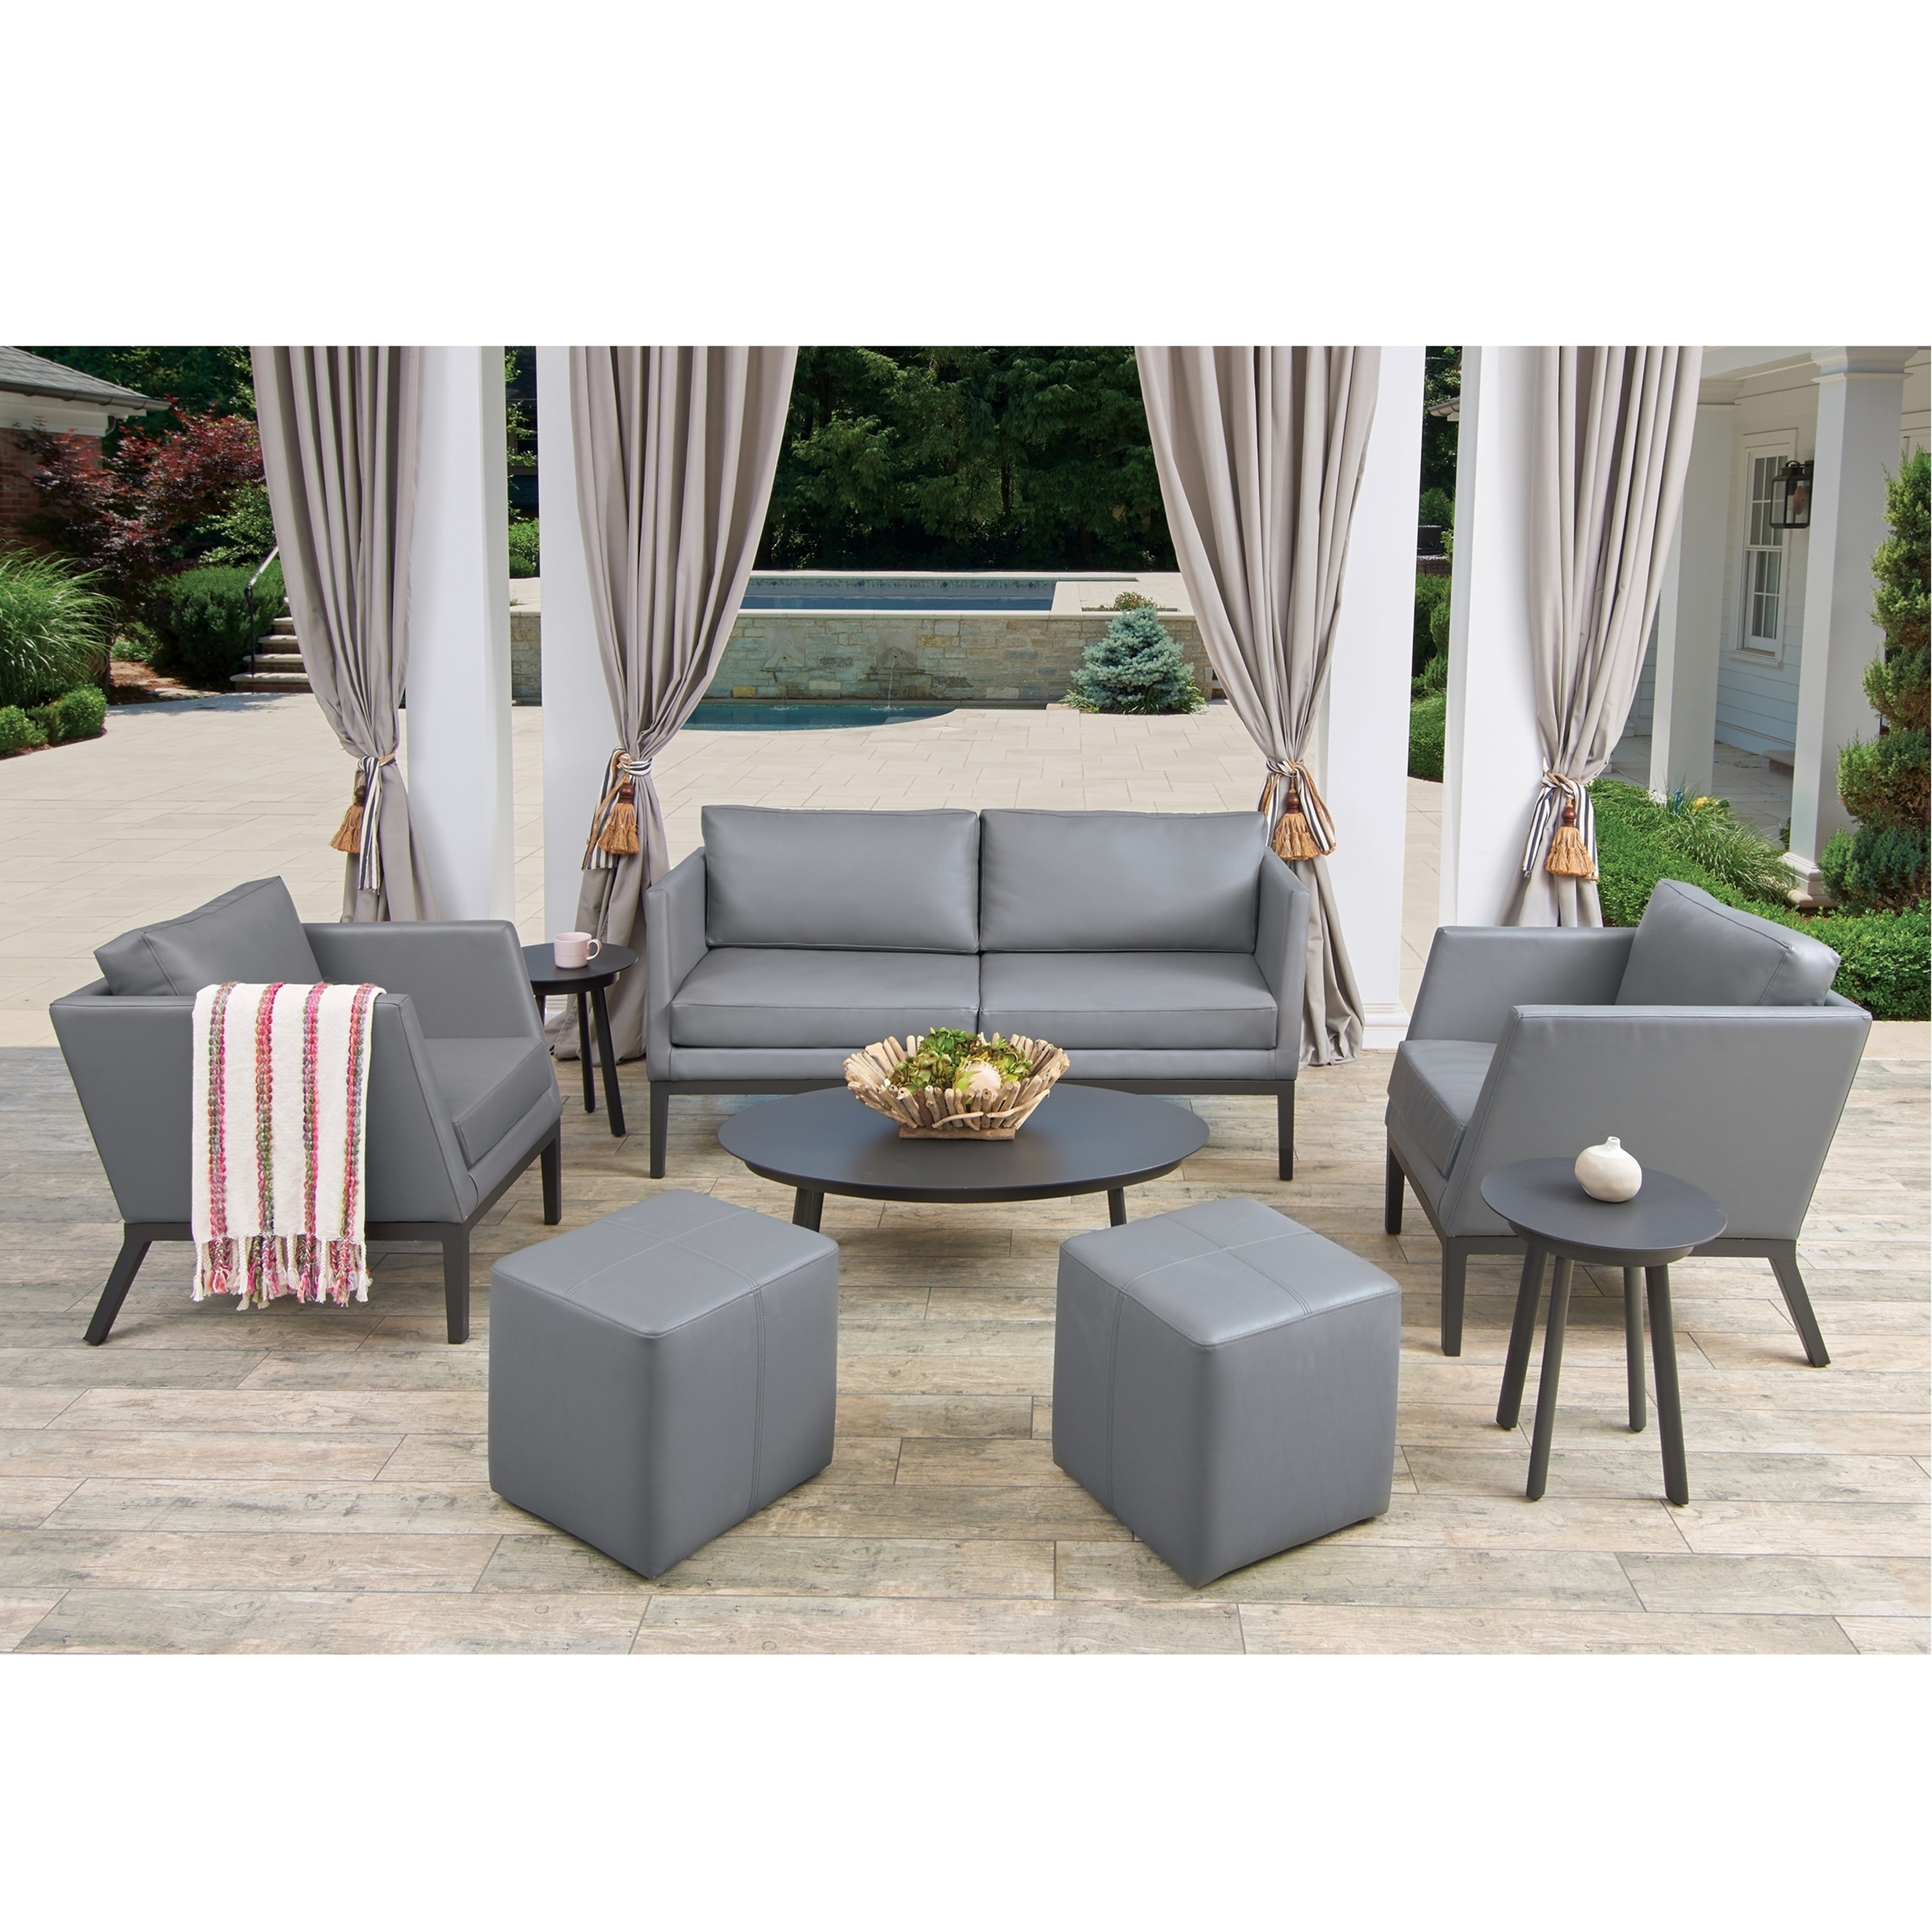 Oxford Garden Salino 8-piece Nickel Nauticau Synthetic Leather Sofa  Club Chairs  Ottoman Poufs  And Eiland Tables Chat Set